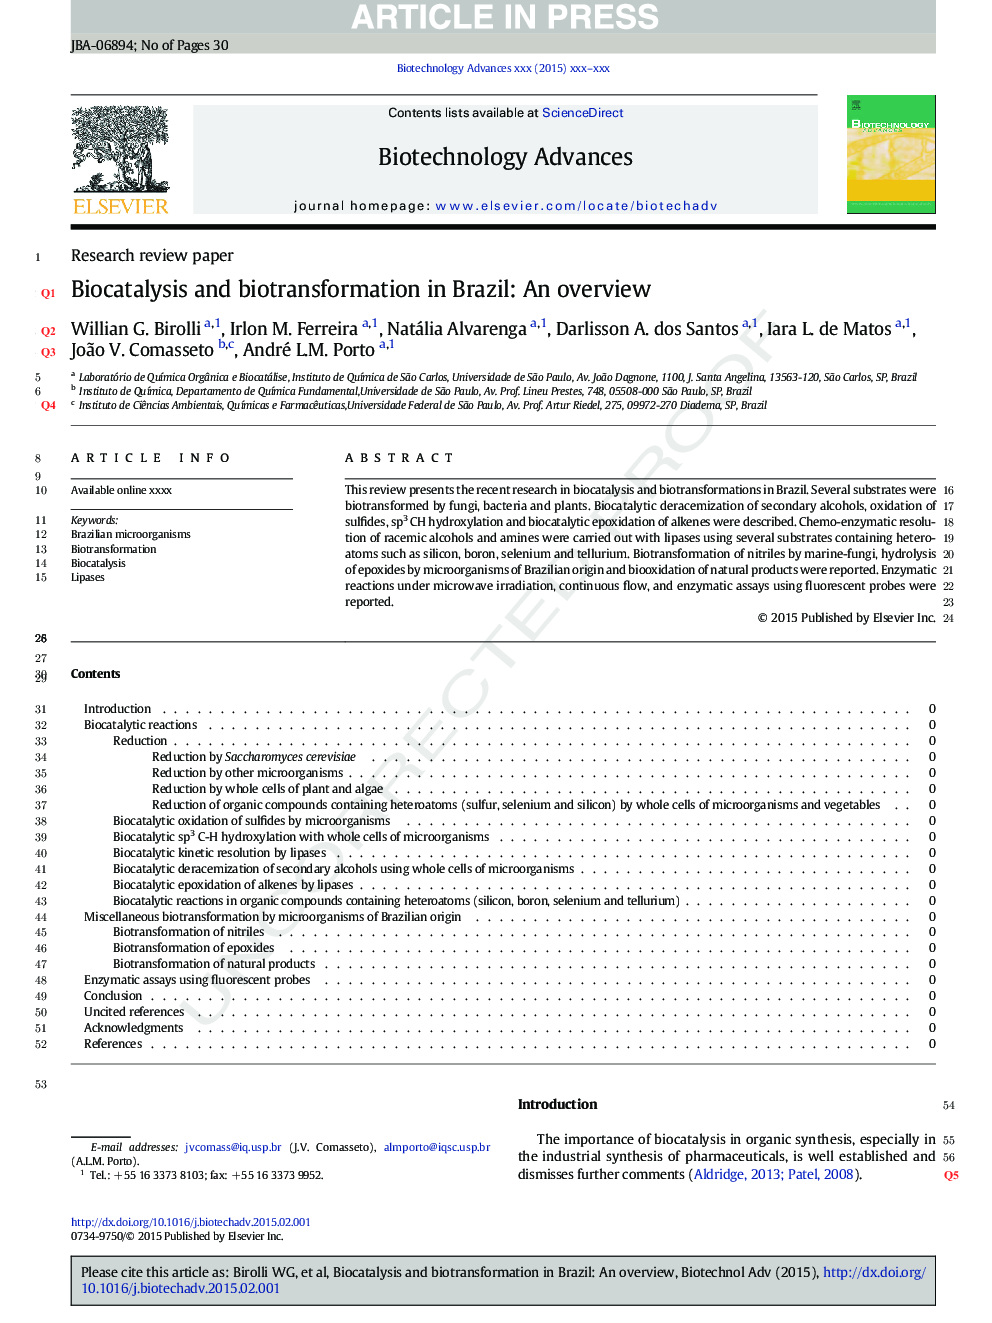 Biocatalysis and biotransformation in Brazil: An overview